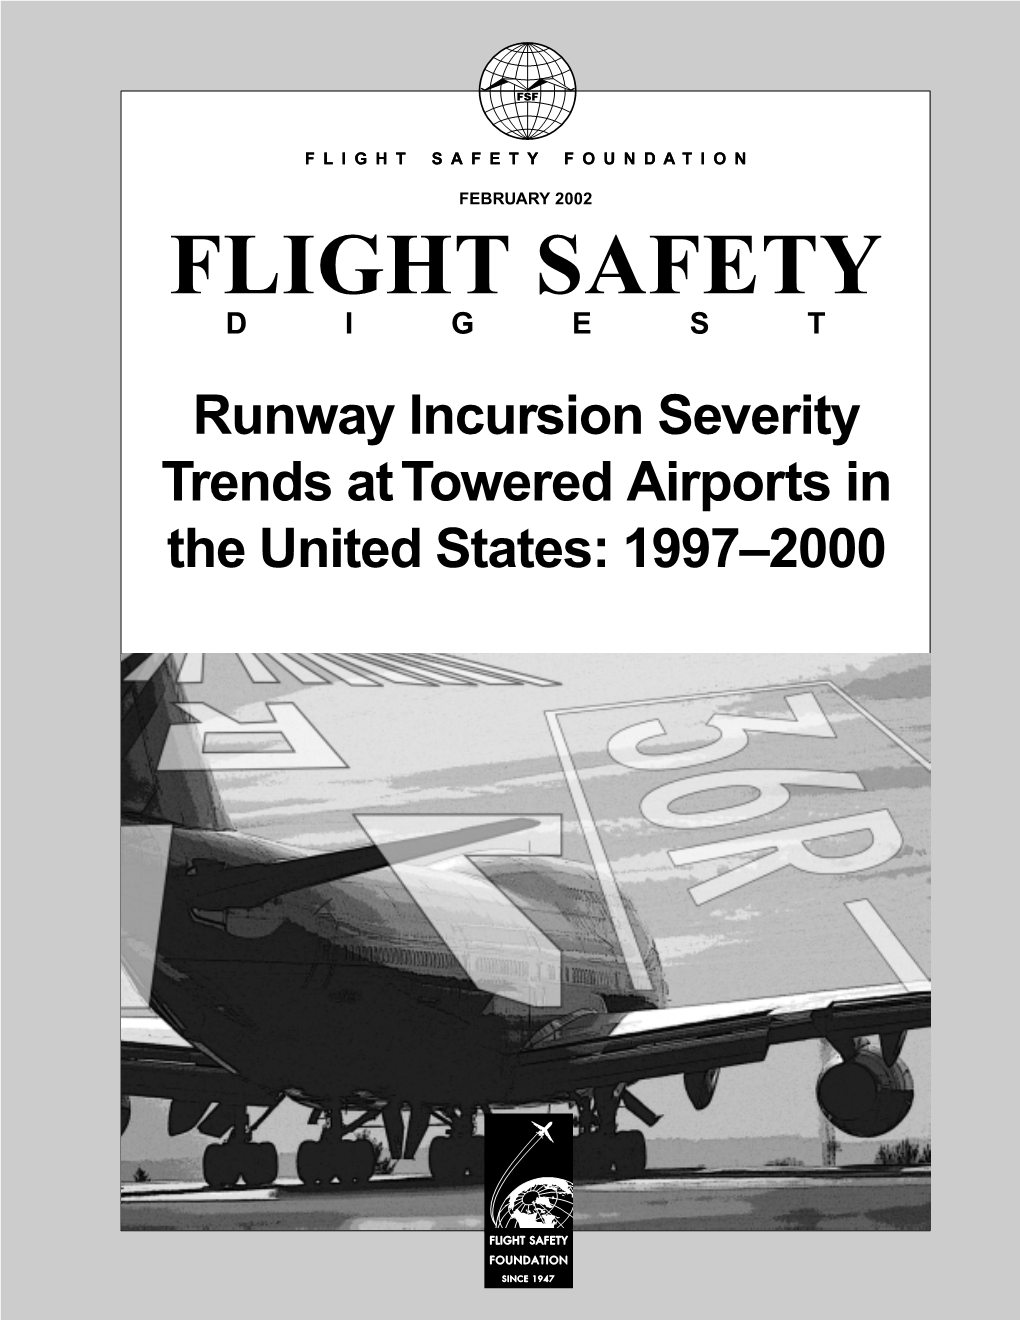 Runway Incursion Severity Trends at Towered Airports in the United States